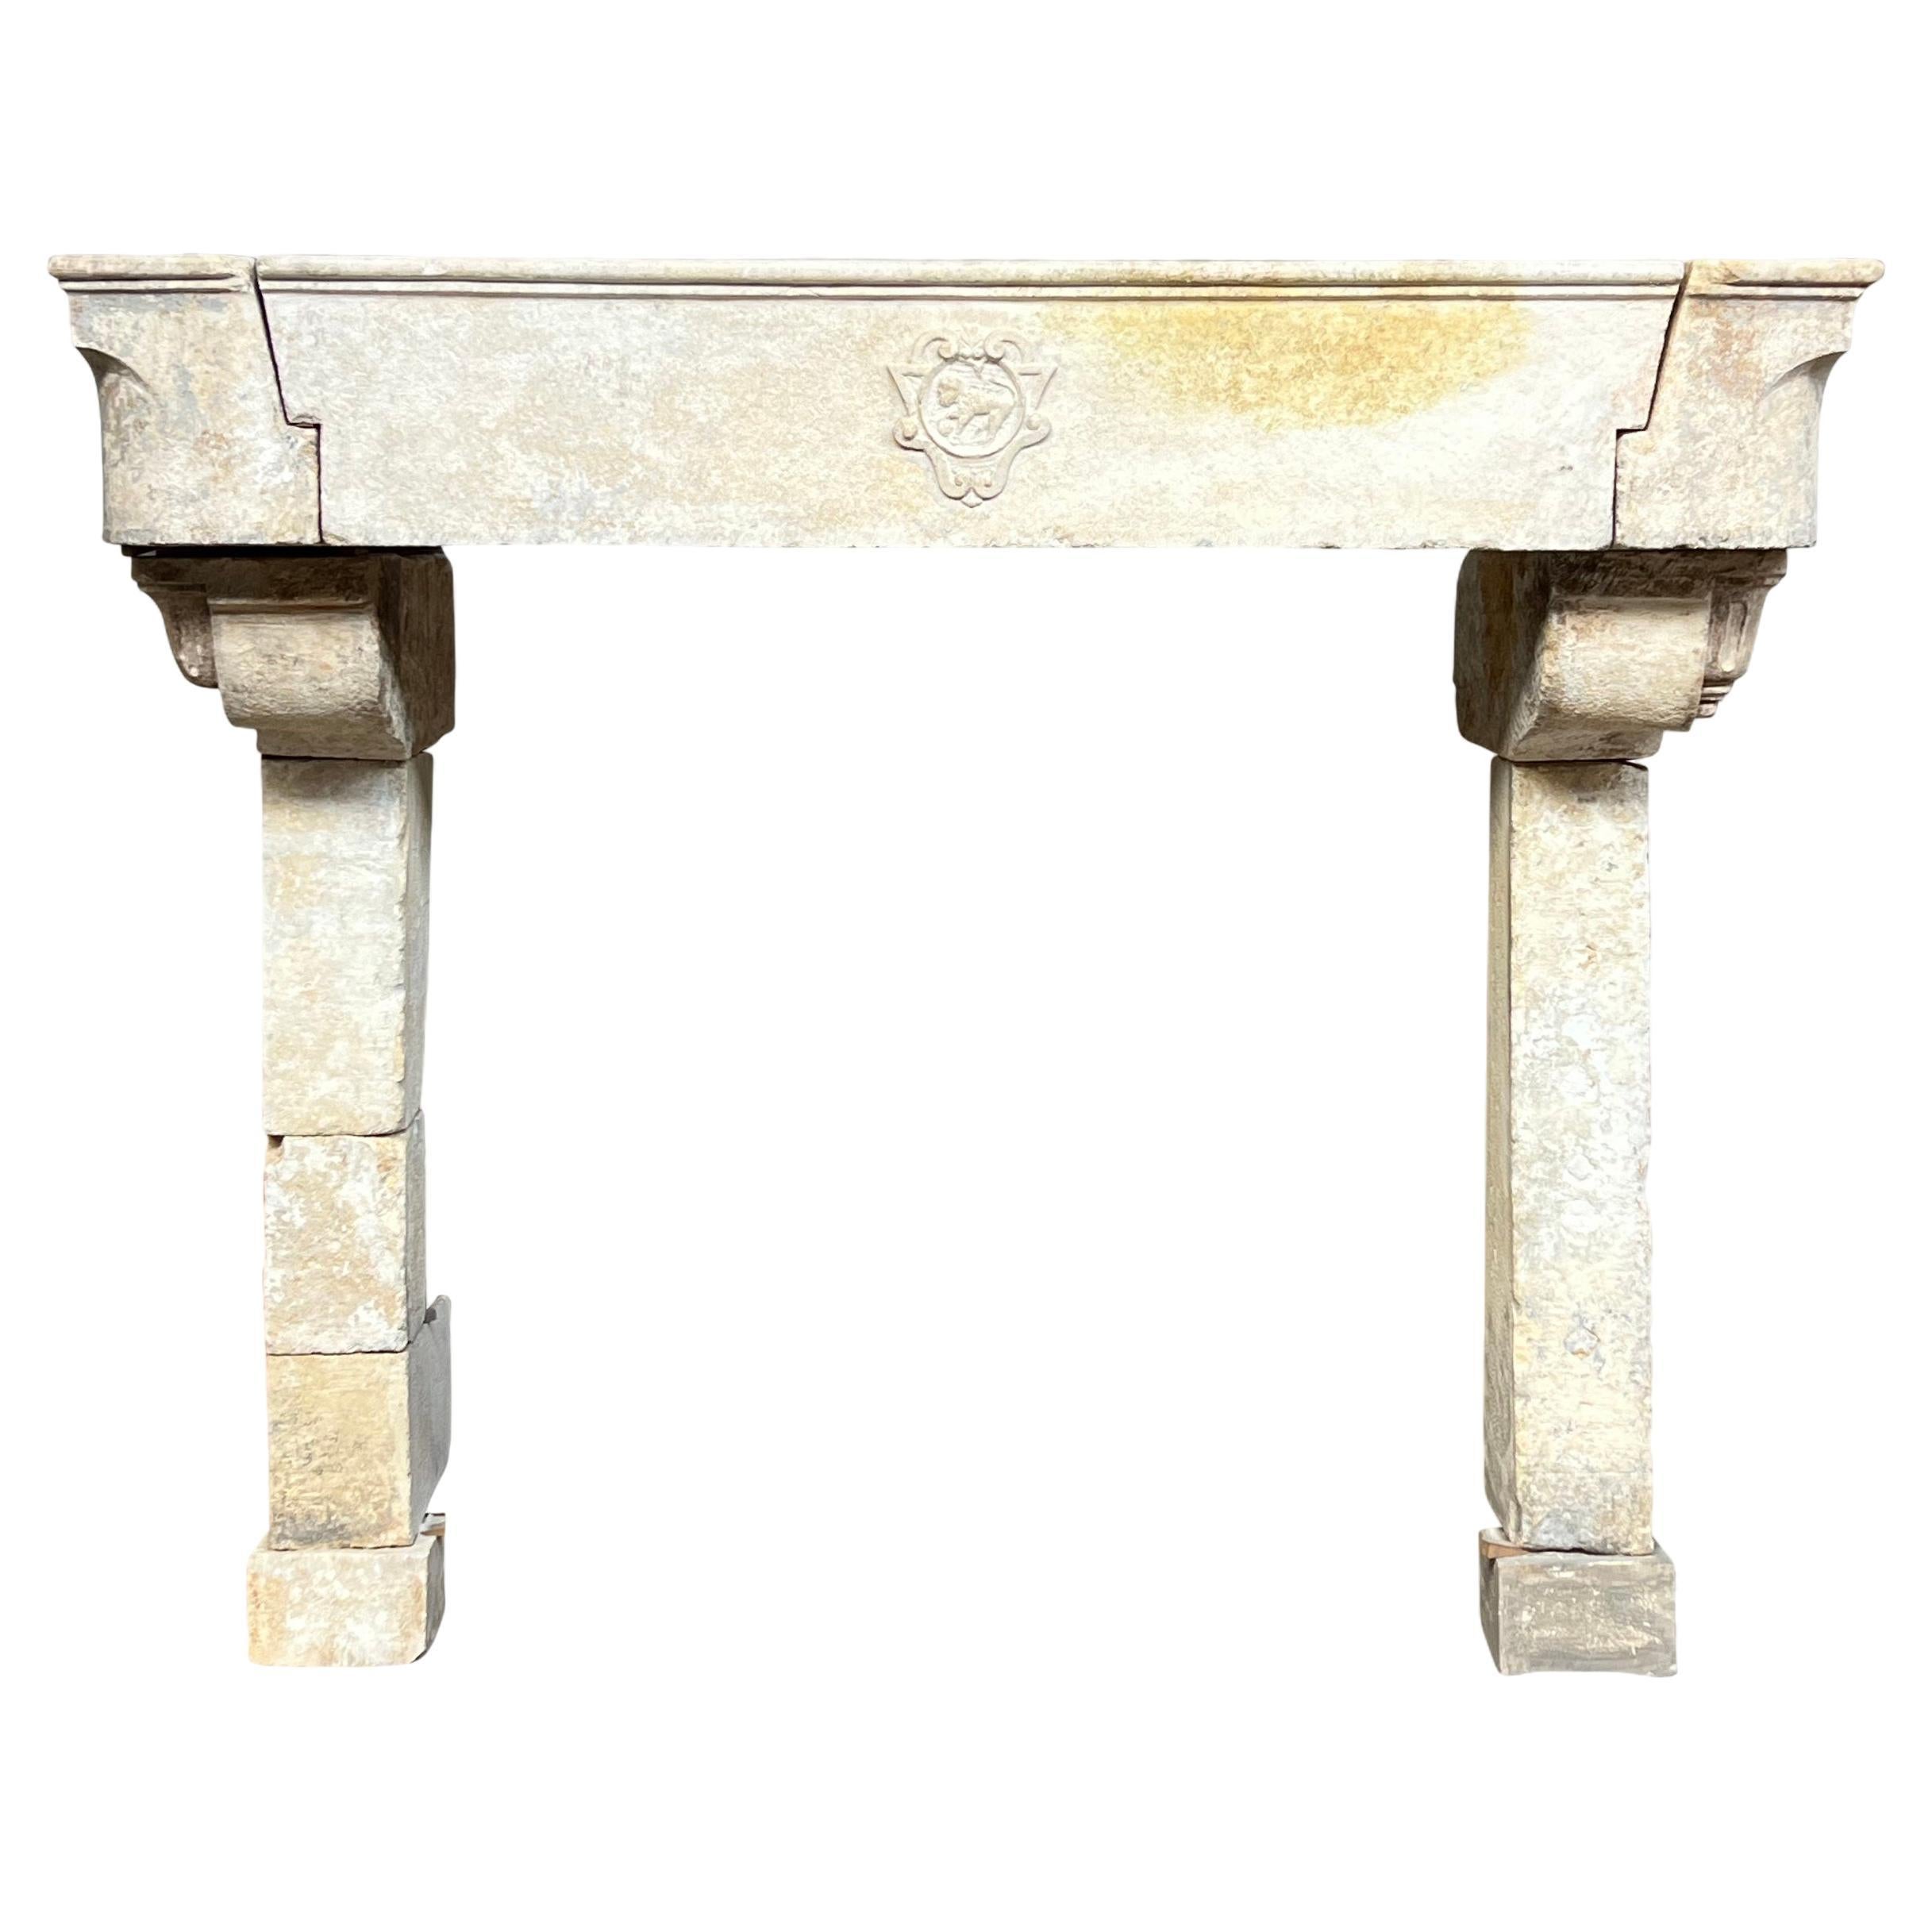 Grand French Cottage Chateau Fireplace In Limestone With Lion Detail For Sale